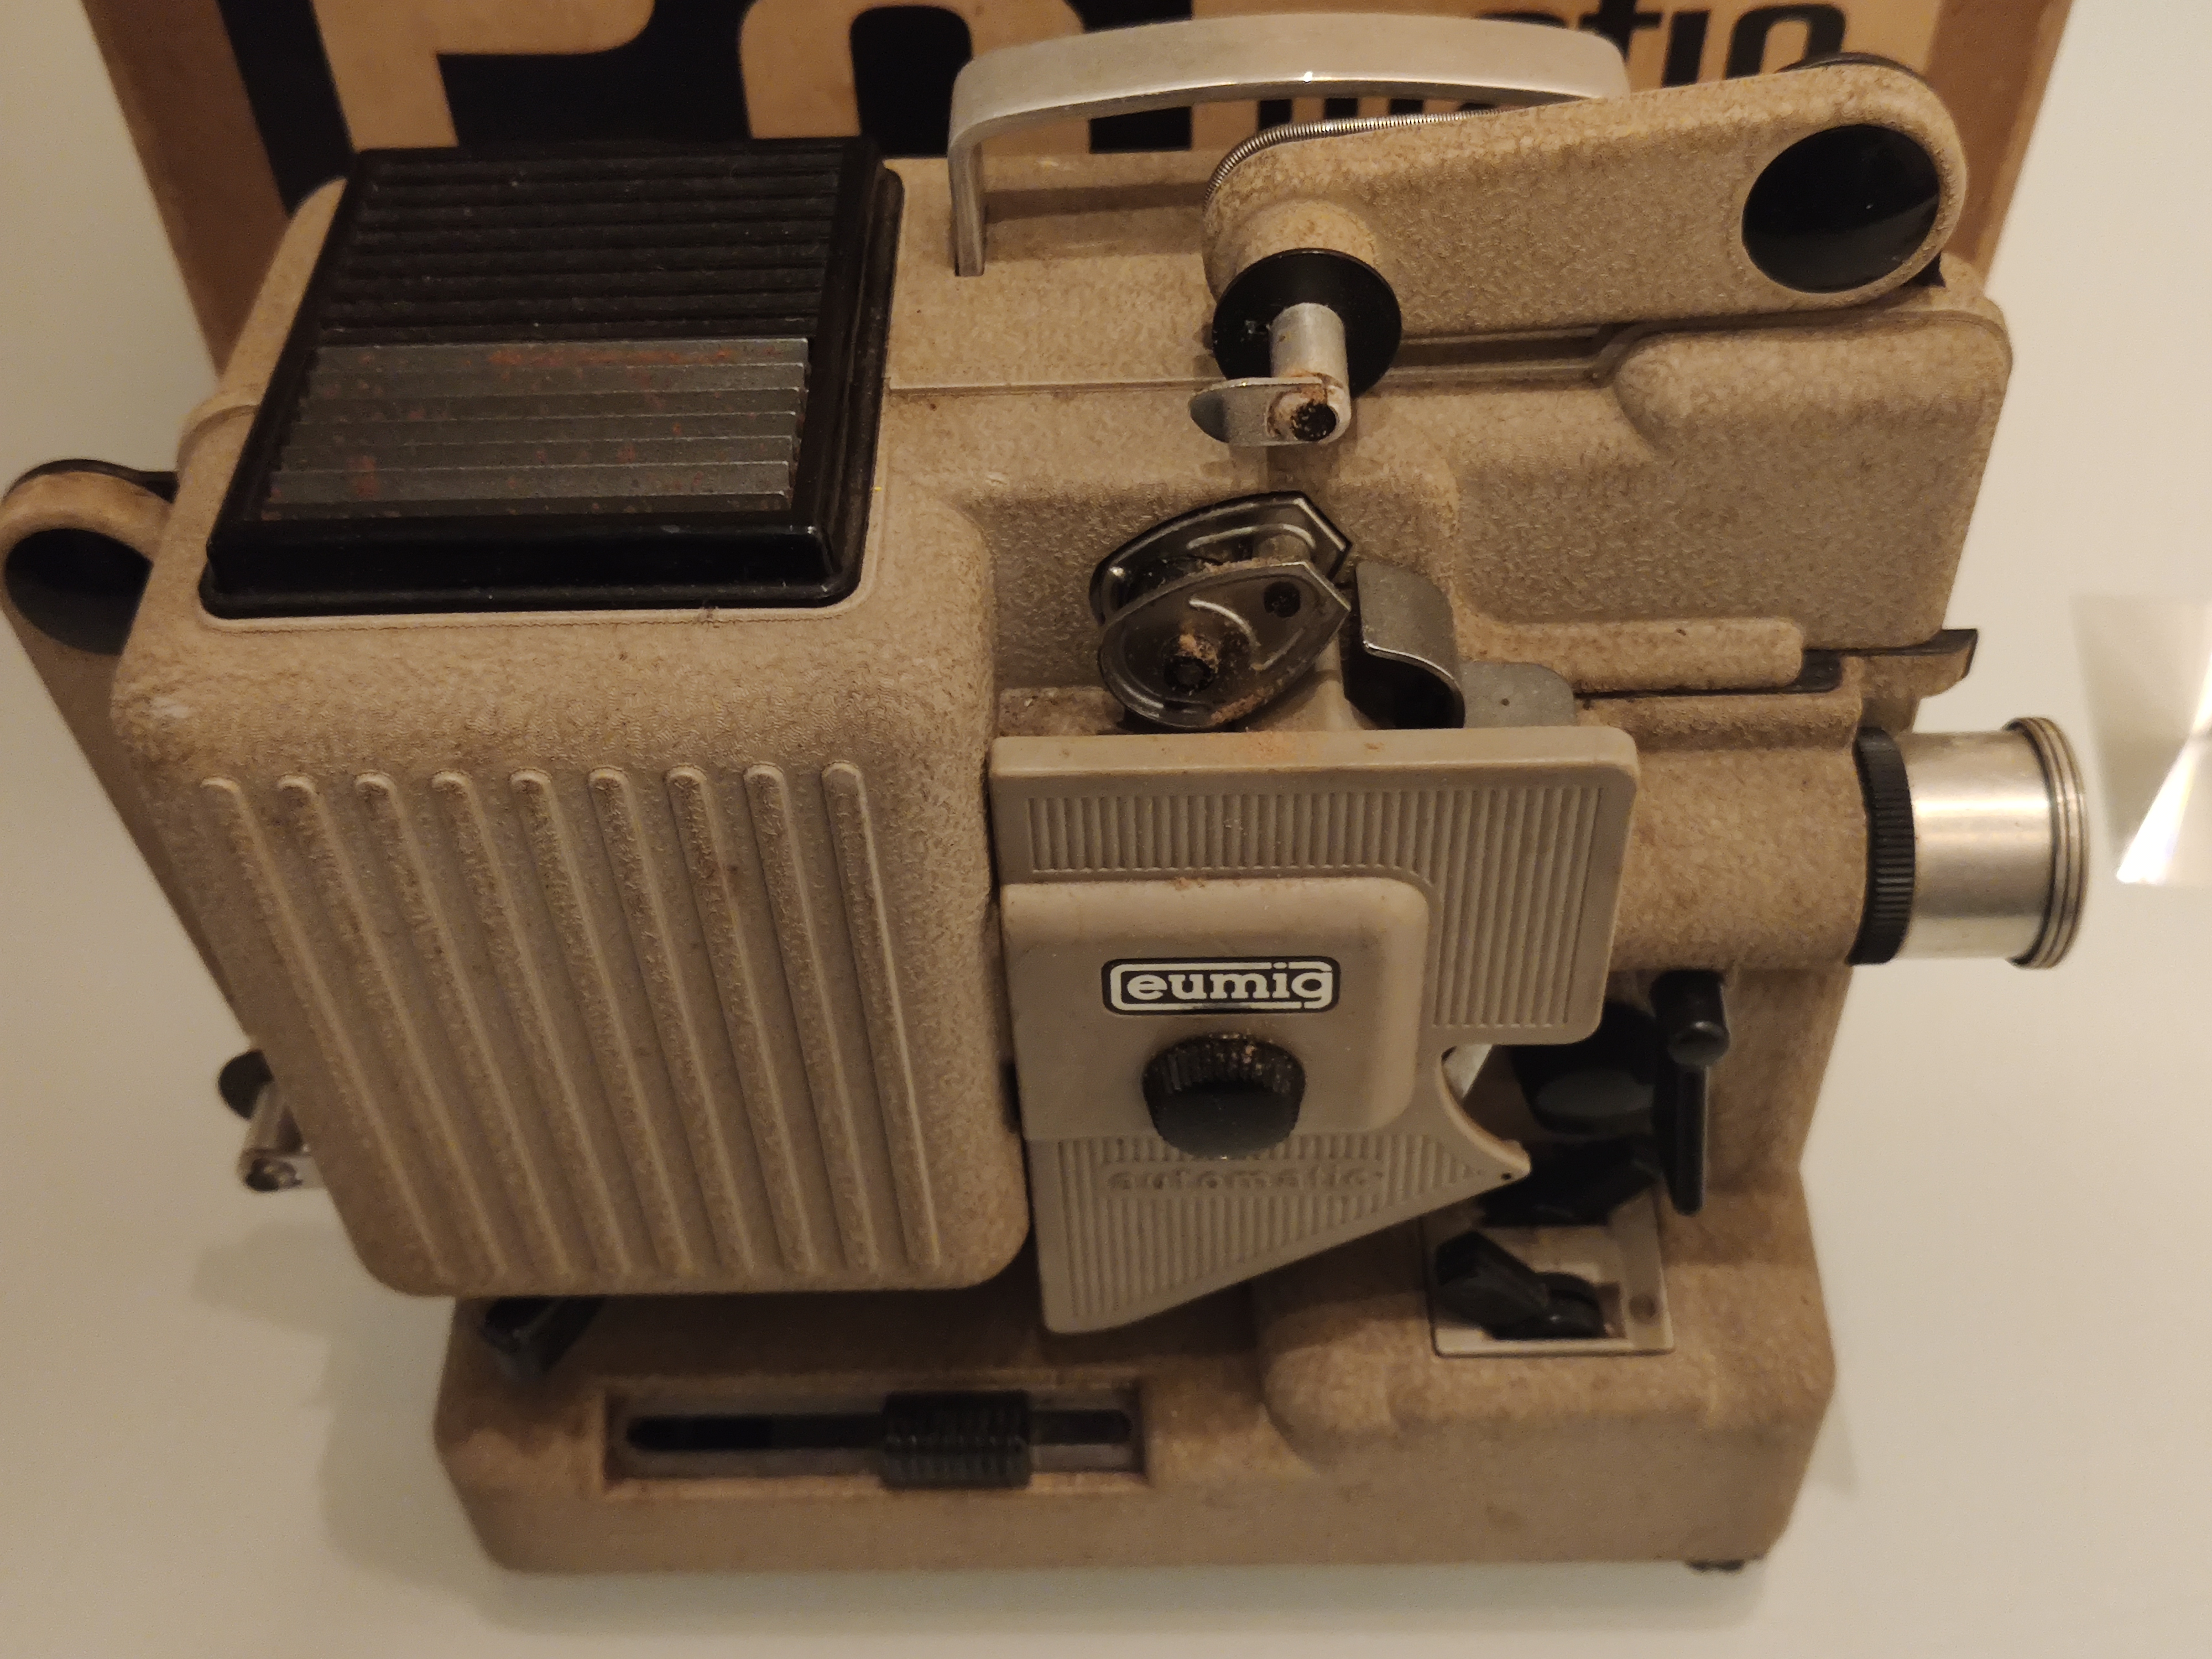 A Eumig P8 Automatic Projector In Its Original Box With Power Lead Etc and A Japanese Film Slicer... - Image 3 of 6